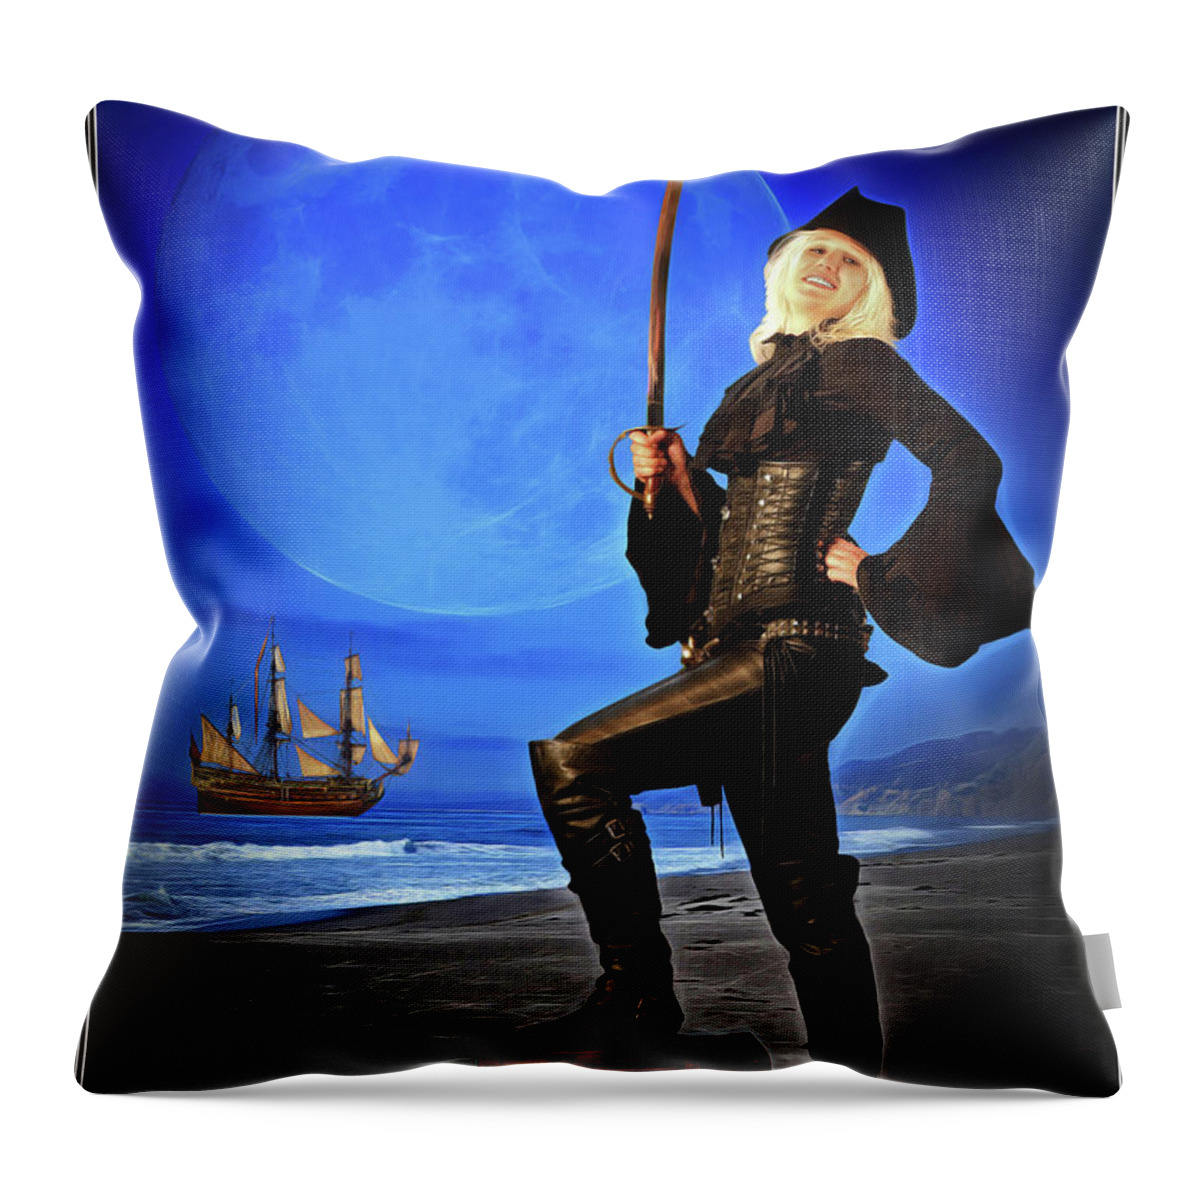 Pirate Throw Pillow featuring the photograph Captain Crystal by Jon Volden